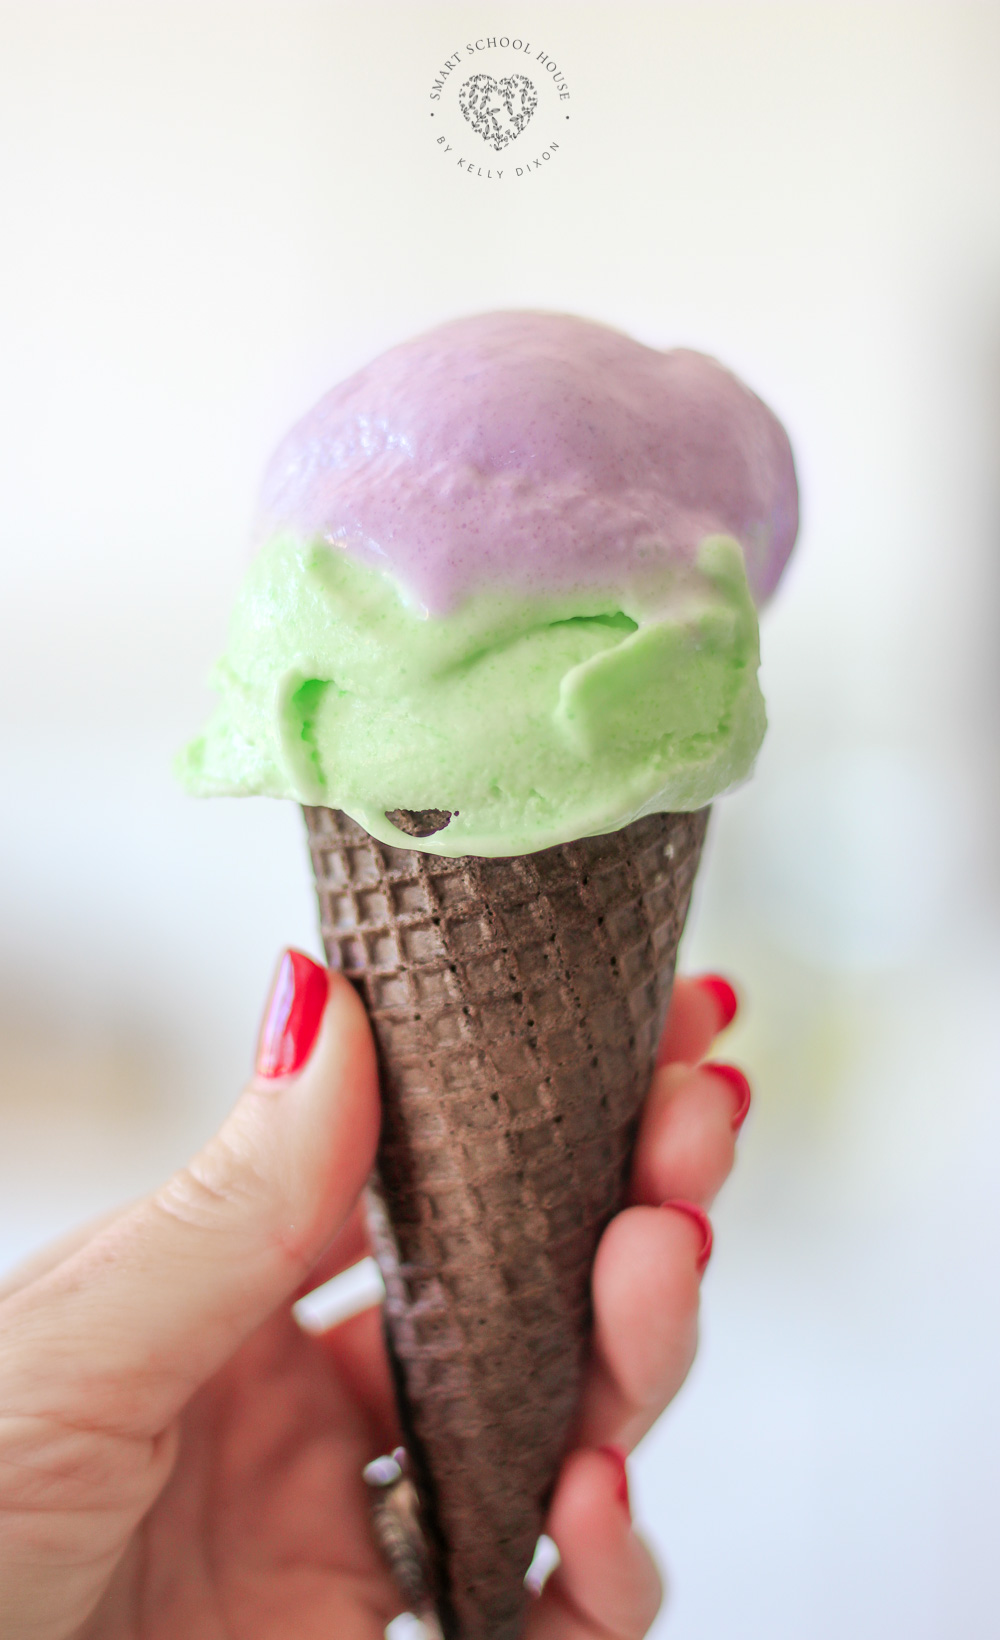 Halloween Ice Cream Made with Jello. The purple and green ice cream with the black cone reminds me of a witch! Fun and EASY dessert for Halloween. #Halloween #HalloweenFood #WitchIceCream #JelloIceCream #HalloweenDessert #Homemade 